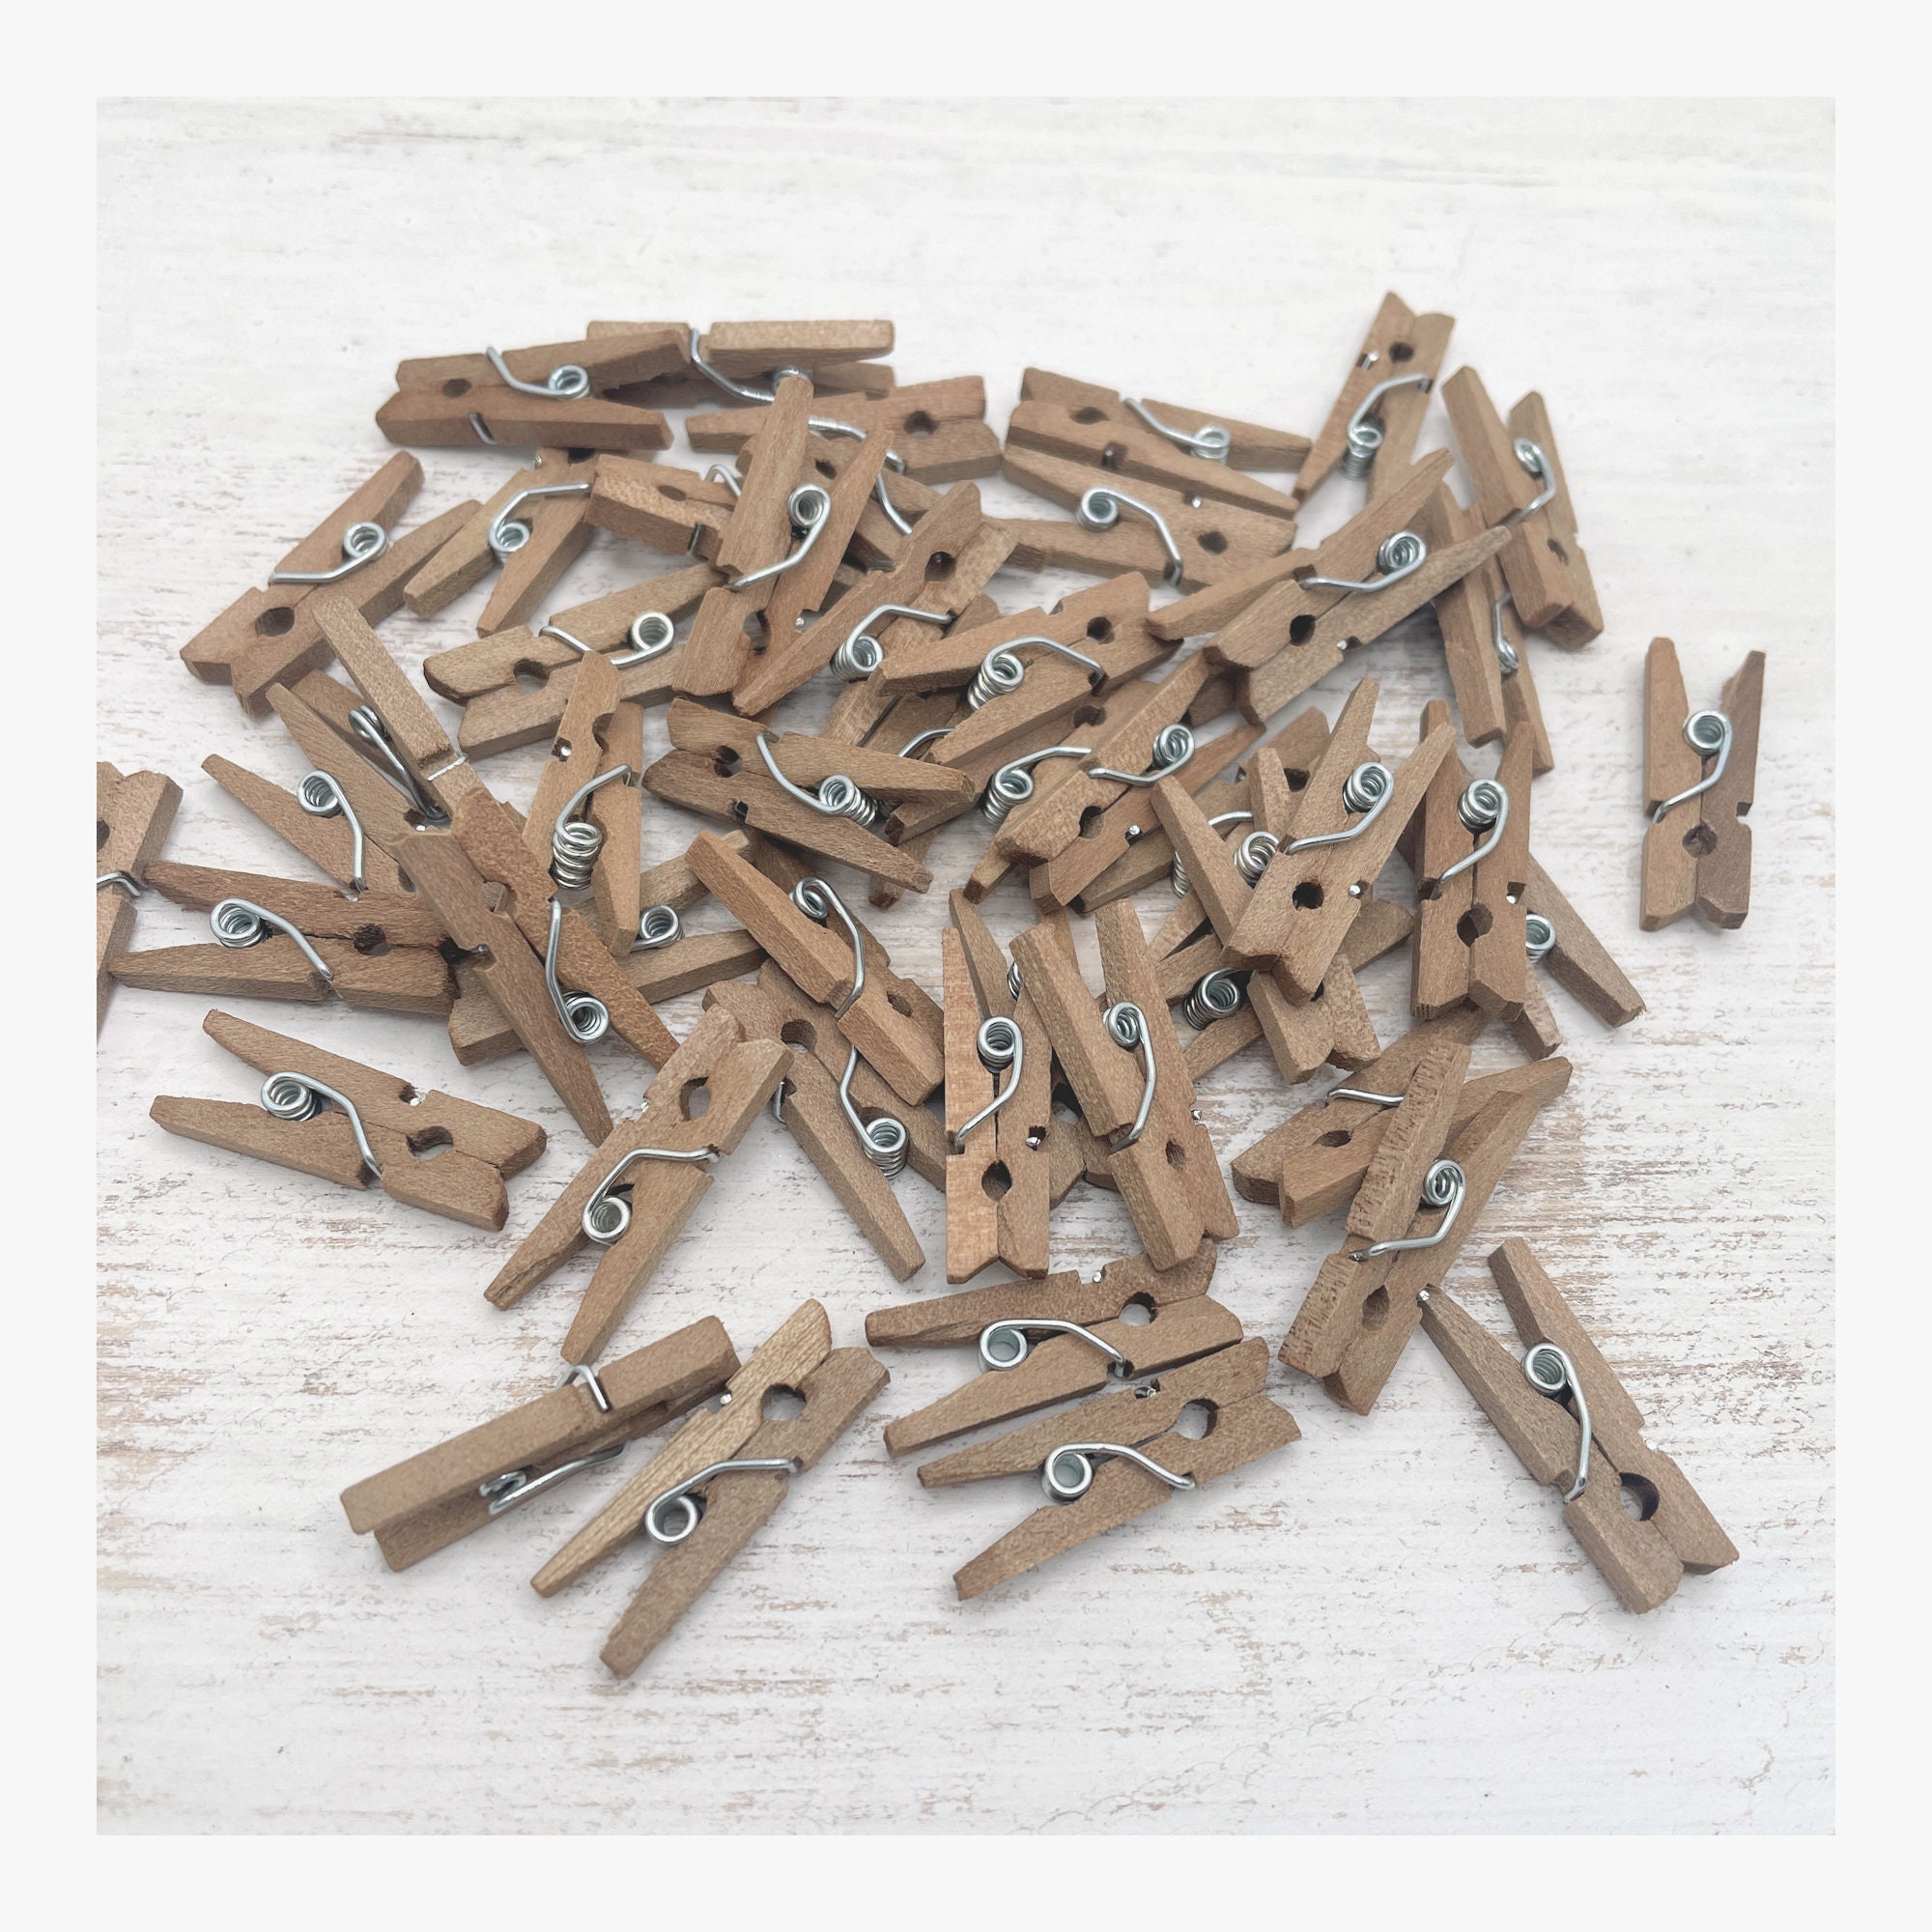 Incraftables Mini Clothes Pins for Crafts 100pcs. Colored Wooden Small Clothes Pins for Photos, Adult Unisex